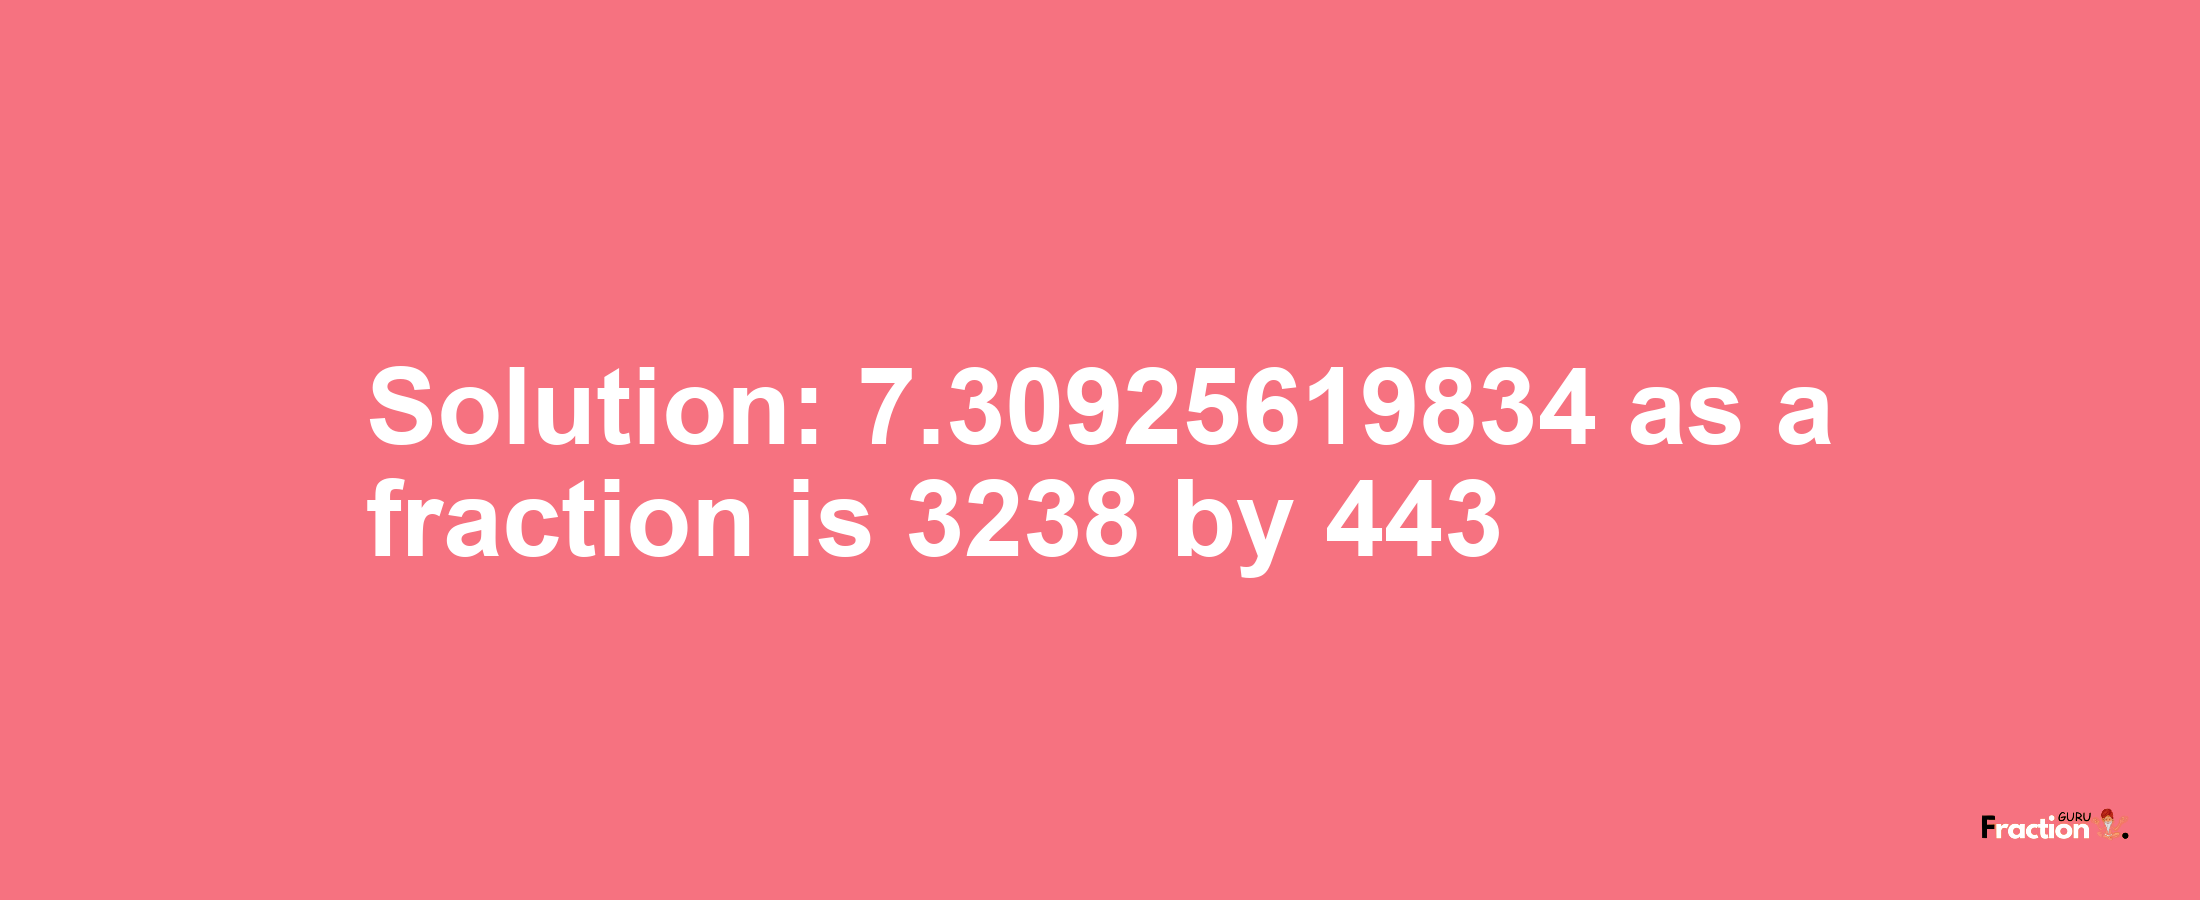 Solution:7.30925619834 as a fraction is 3238/443